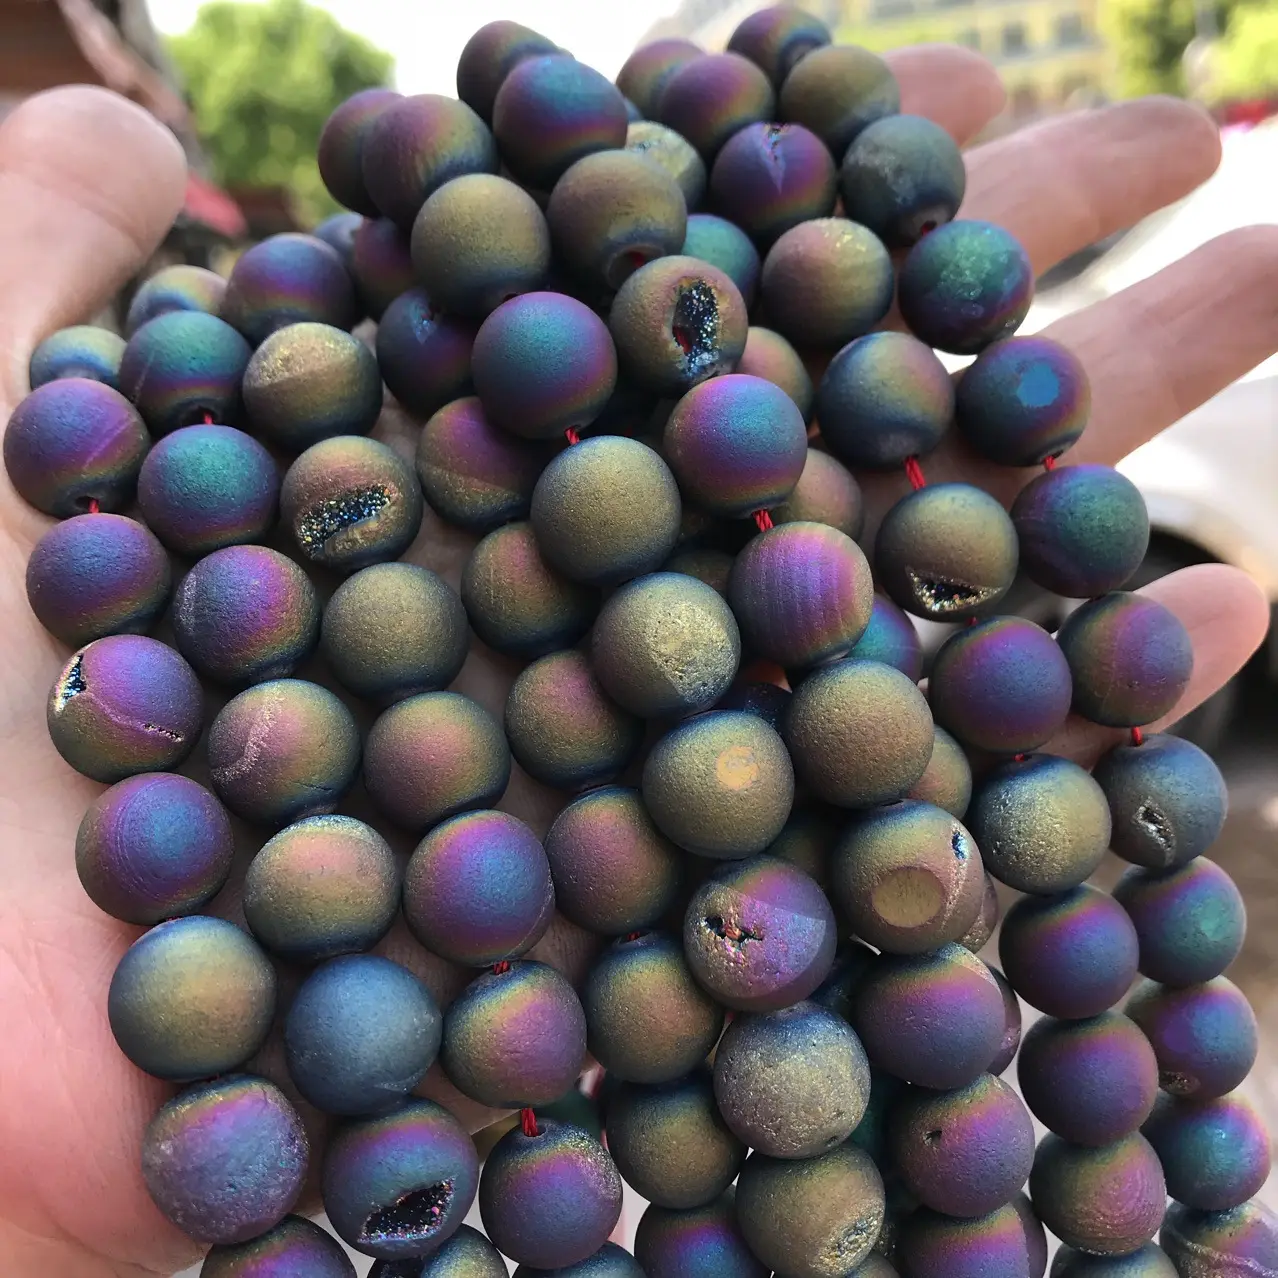 Druzy Agate Wholesale Gemstone Smooth Loose Round Rainbow Blue Black Gold Silver Plated Druzy Agate Beads für Jewelry Making